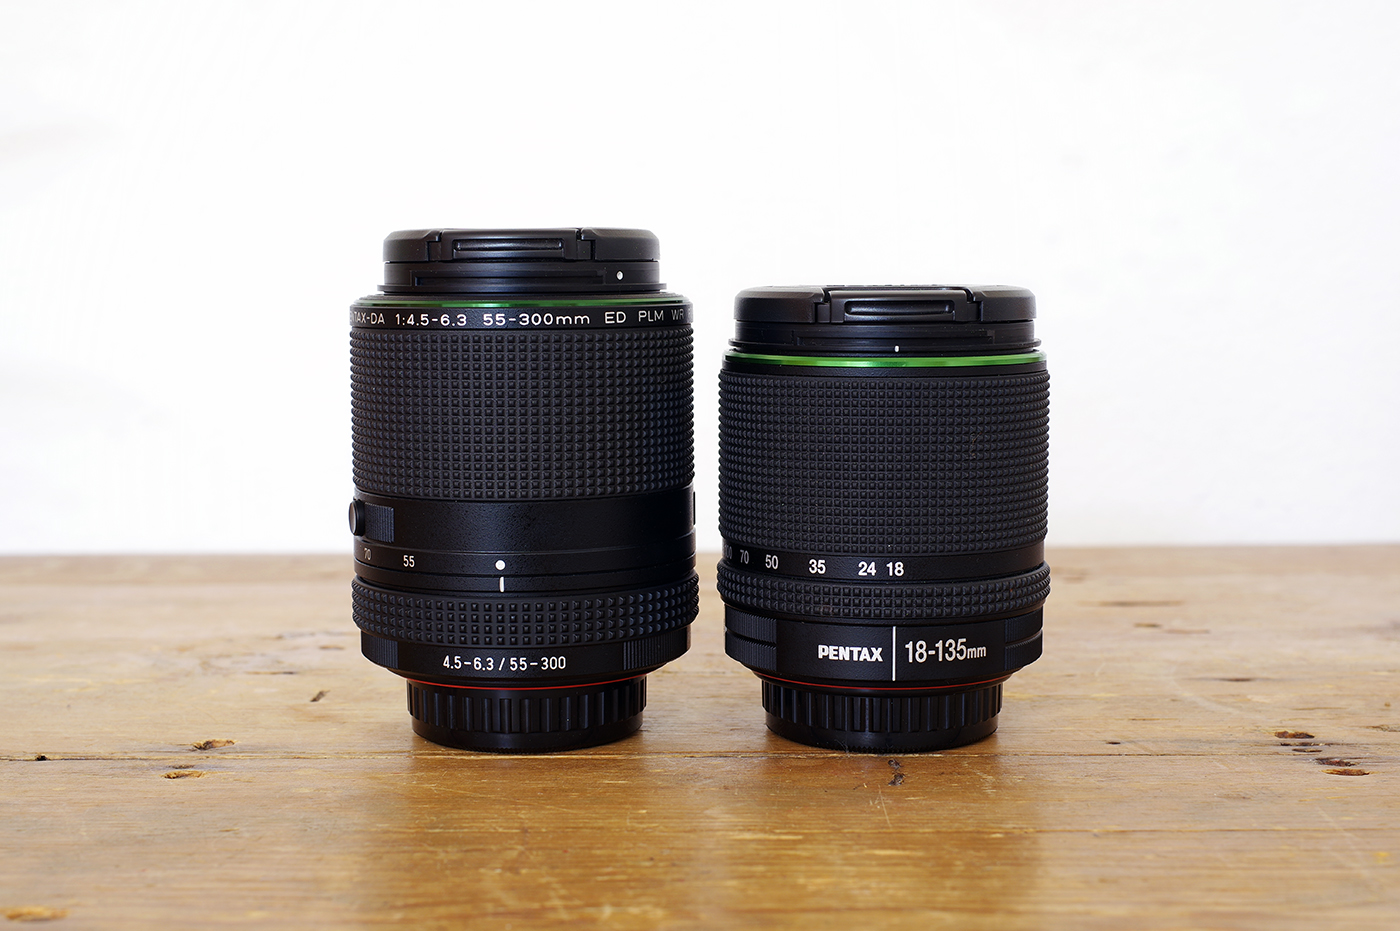 The 55-300mm PLM is slightly longer and wider than the DA 18-135mm WR.